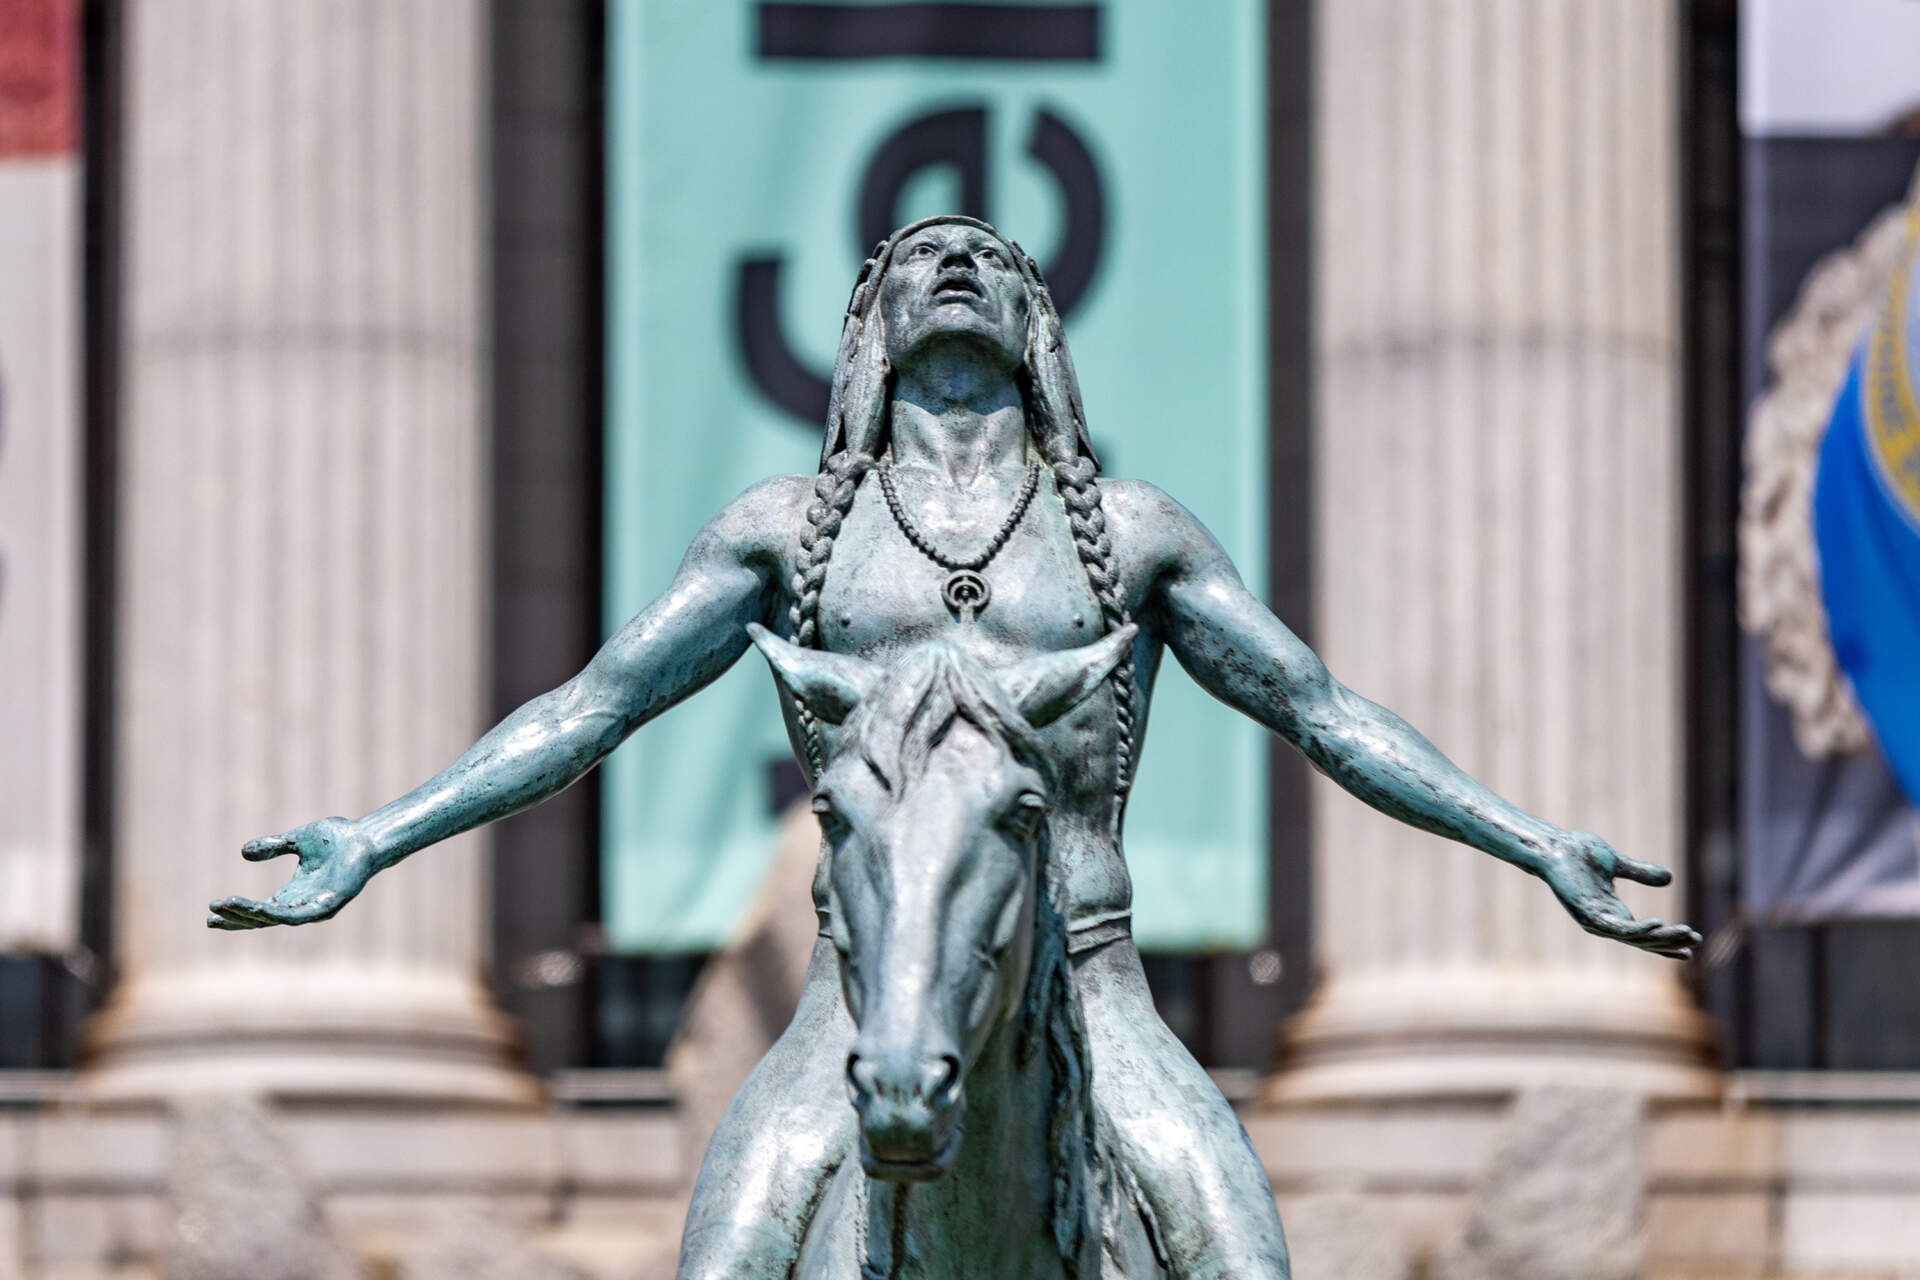 "Appeal to the Great Spirit," a 1909 equestrian statue by Cyrus Dallin in front of the Museum of Fine Arts Boston. (Jesse Costa/WBUR)